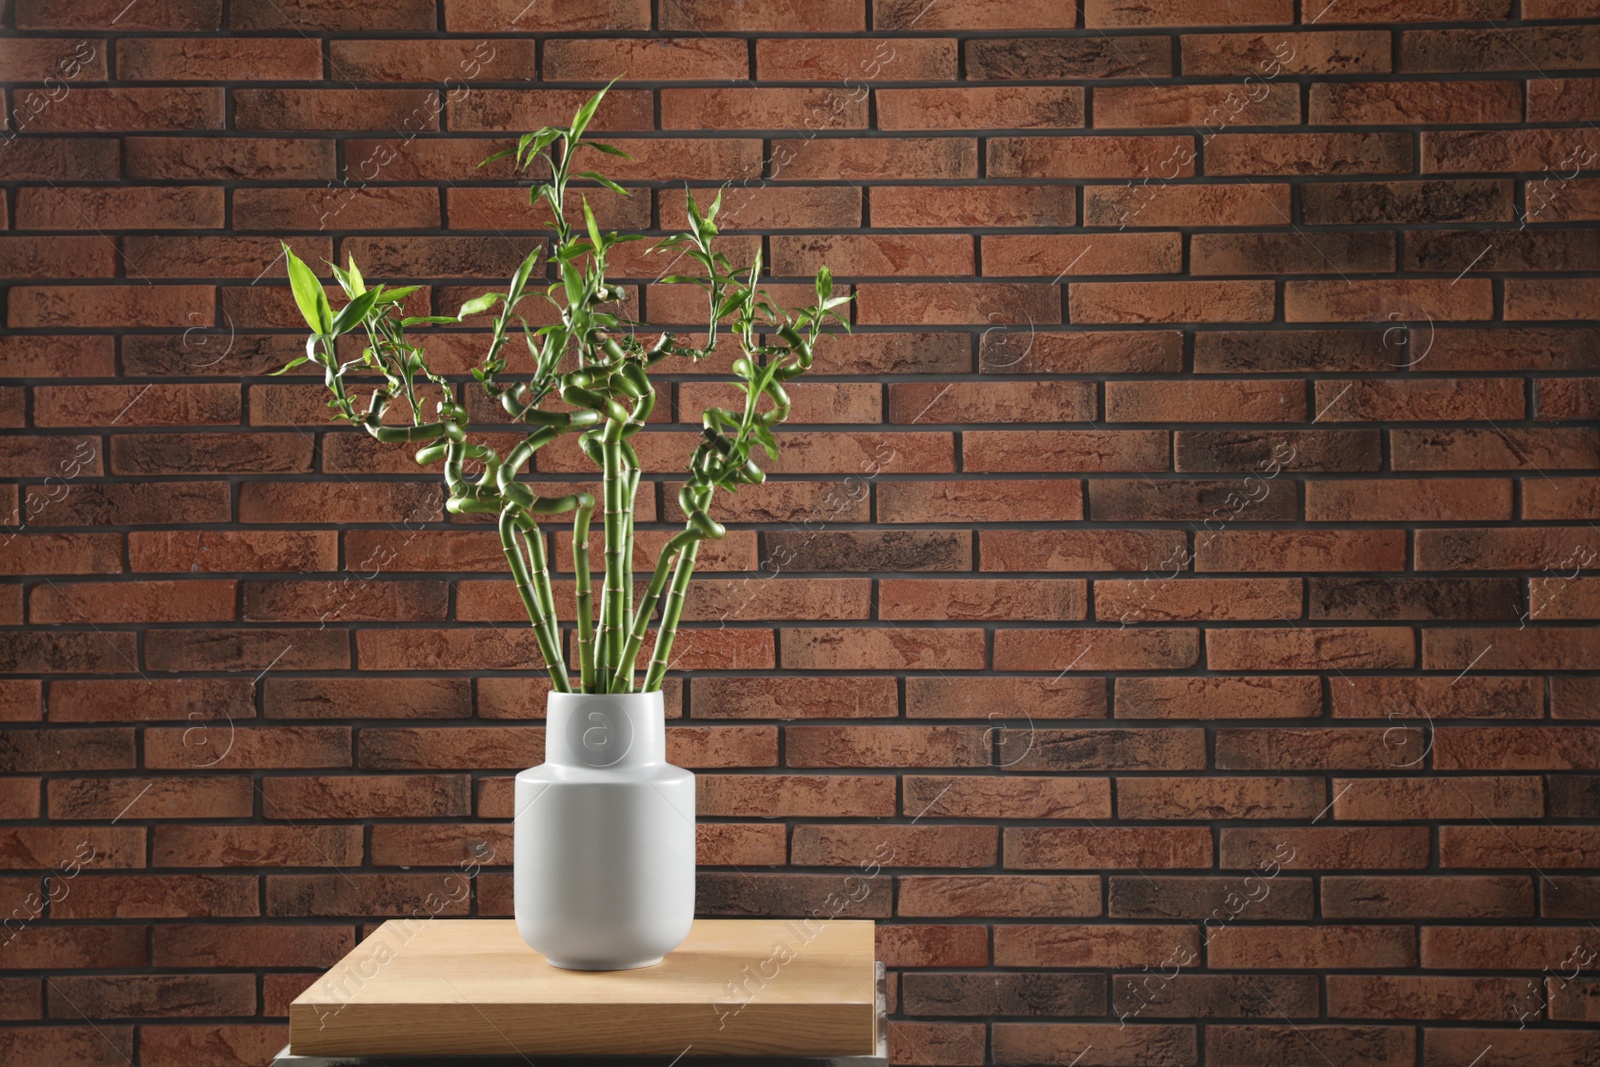 Photo of Vase with bamboo stems on table against brick wall, space for text